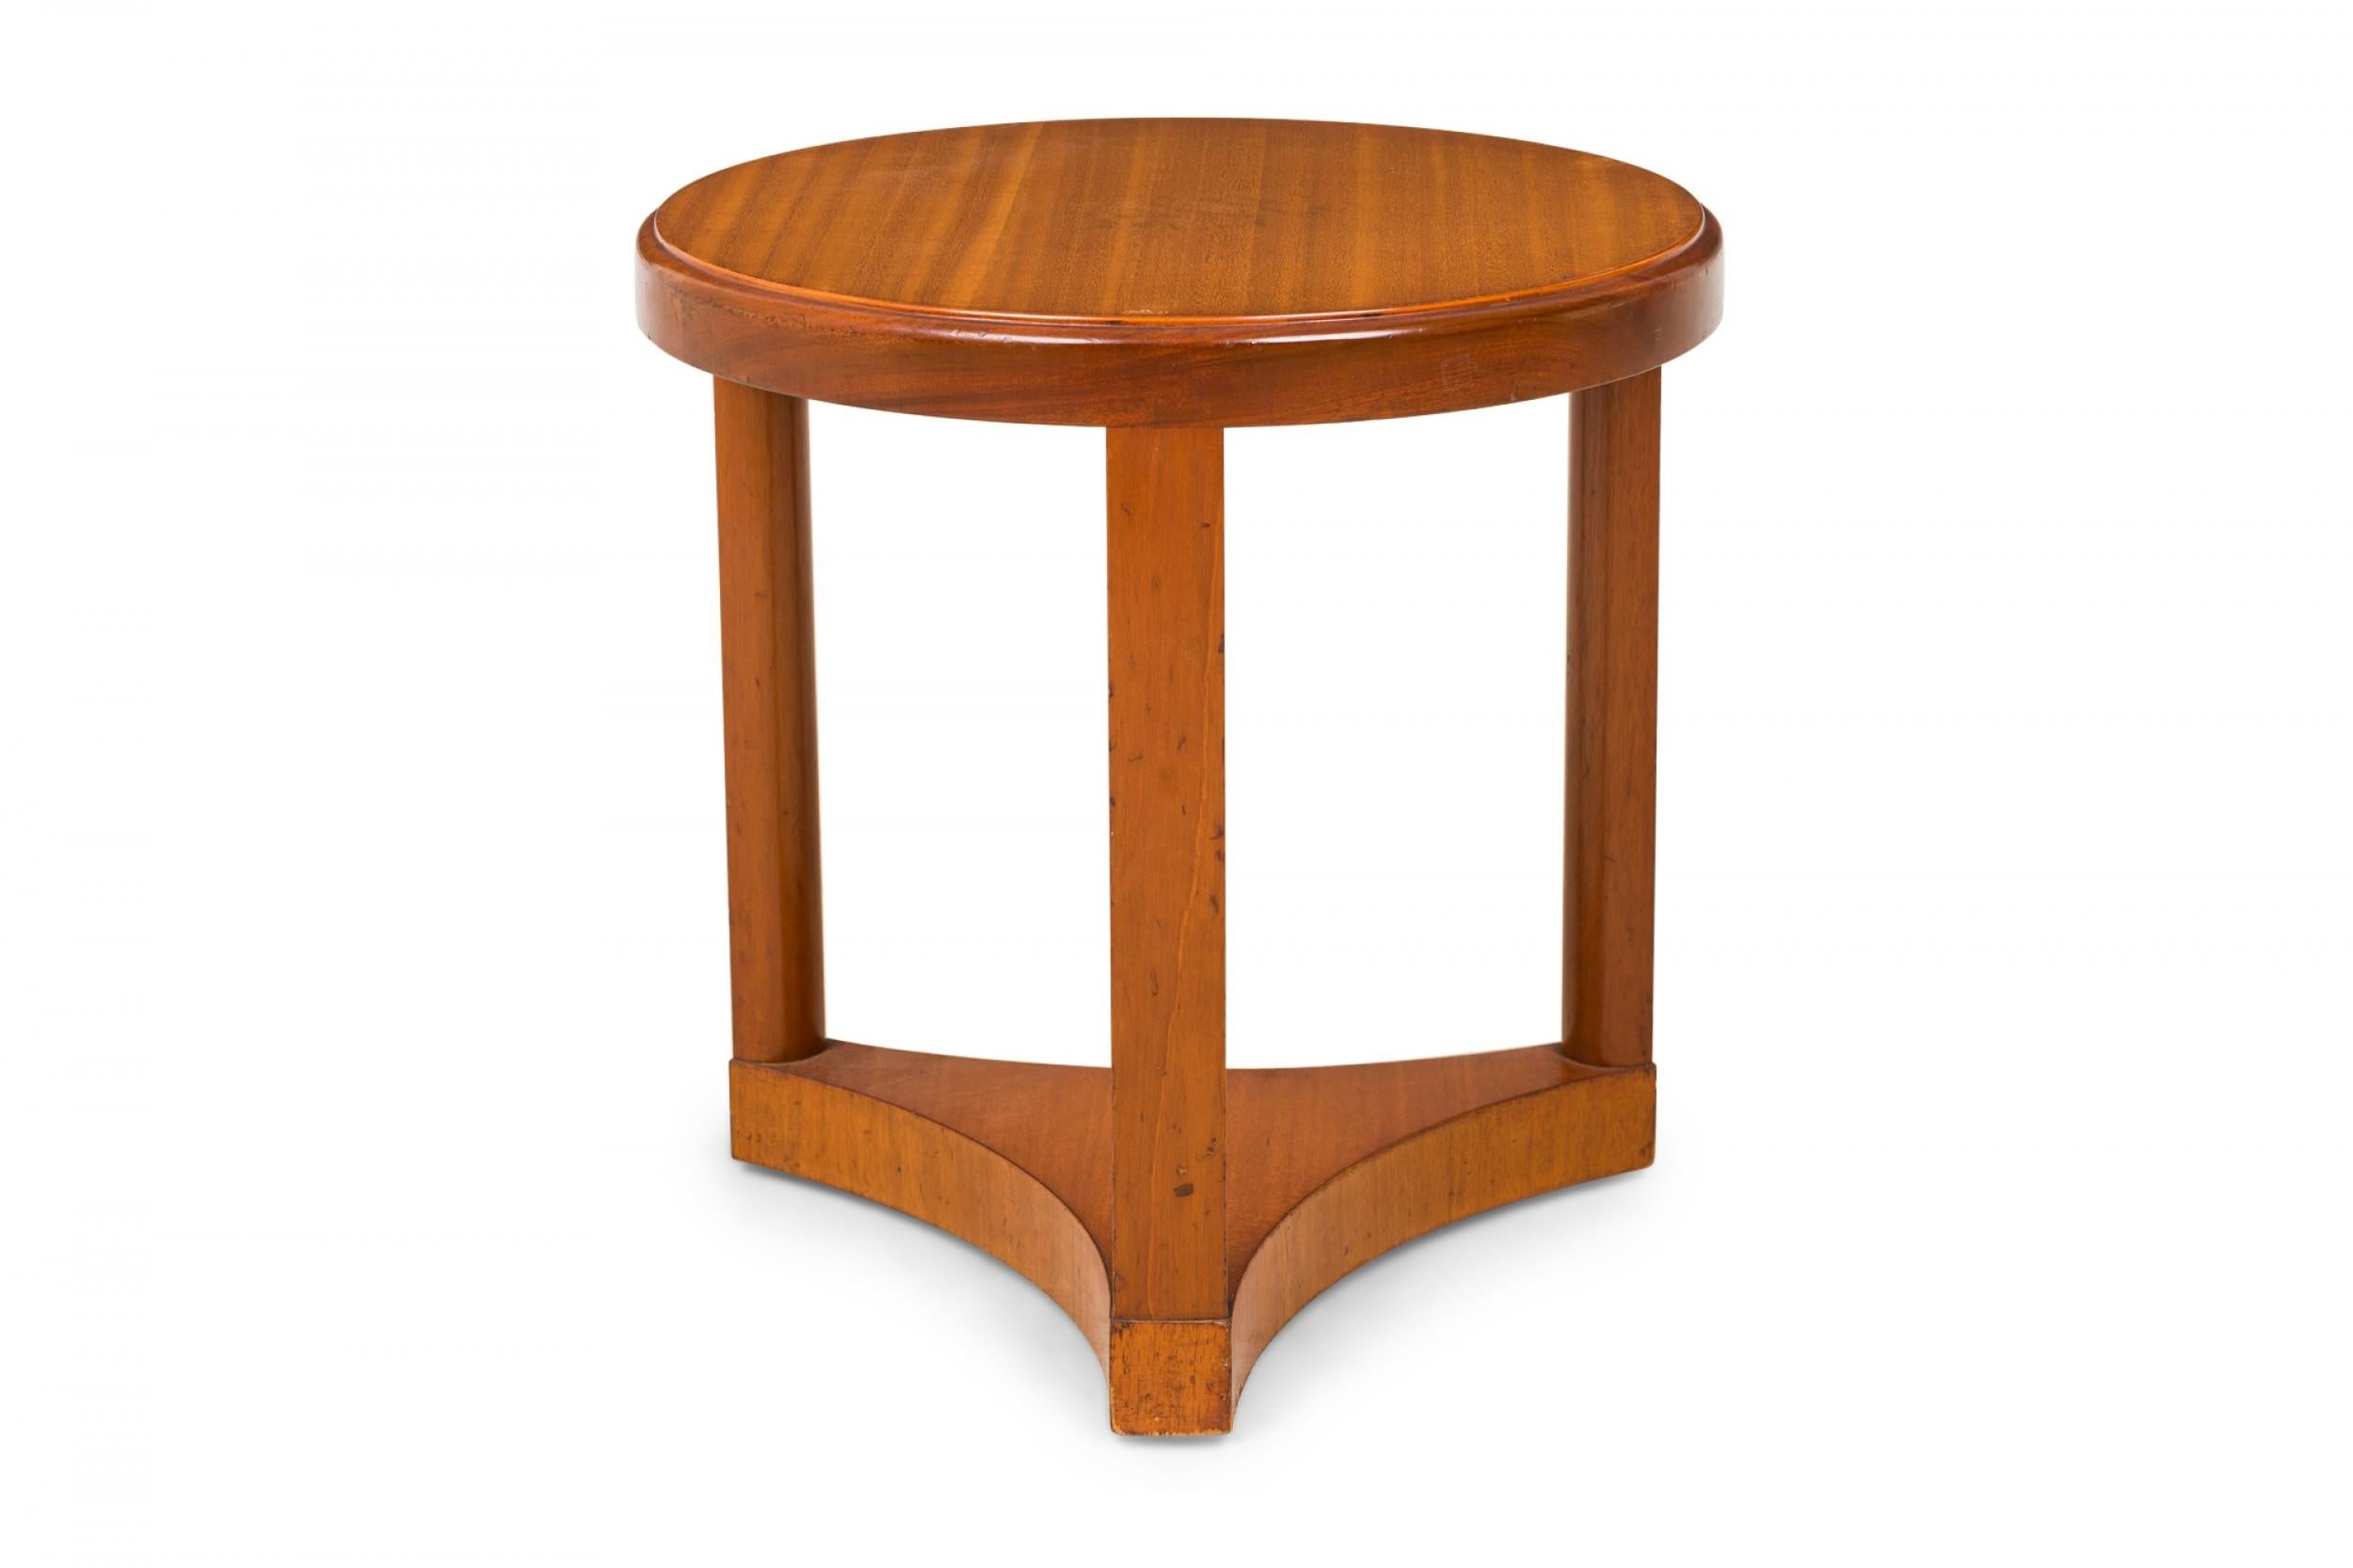 American Mid-Century round wooden side / end table with a circular top with beveled edge resting on three vertical rectangular supports connected to a triangular scooped side base. (EDWARD WORMLEY)(Similar shorter table: DUF0637).